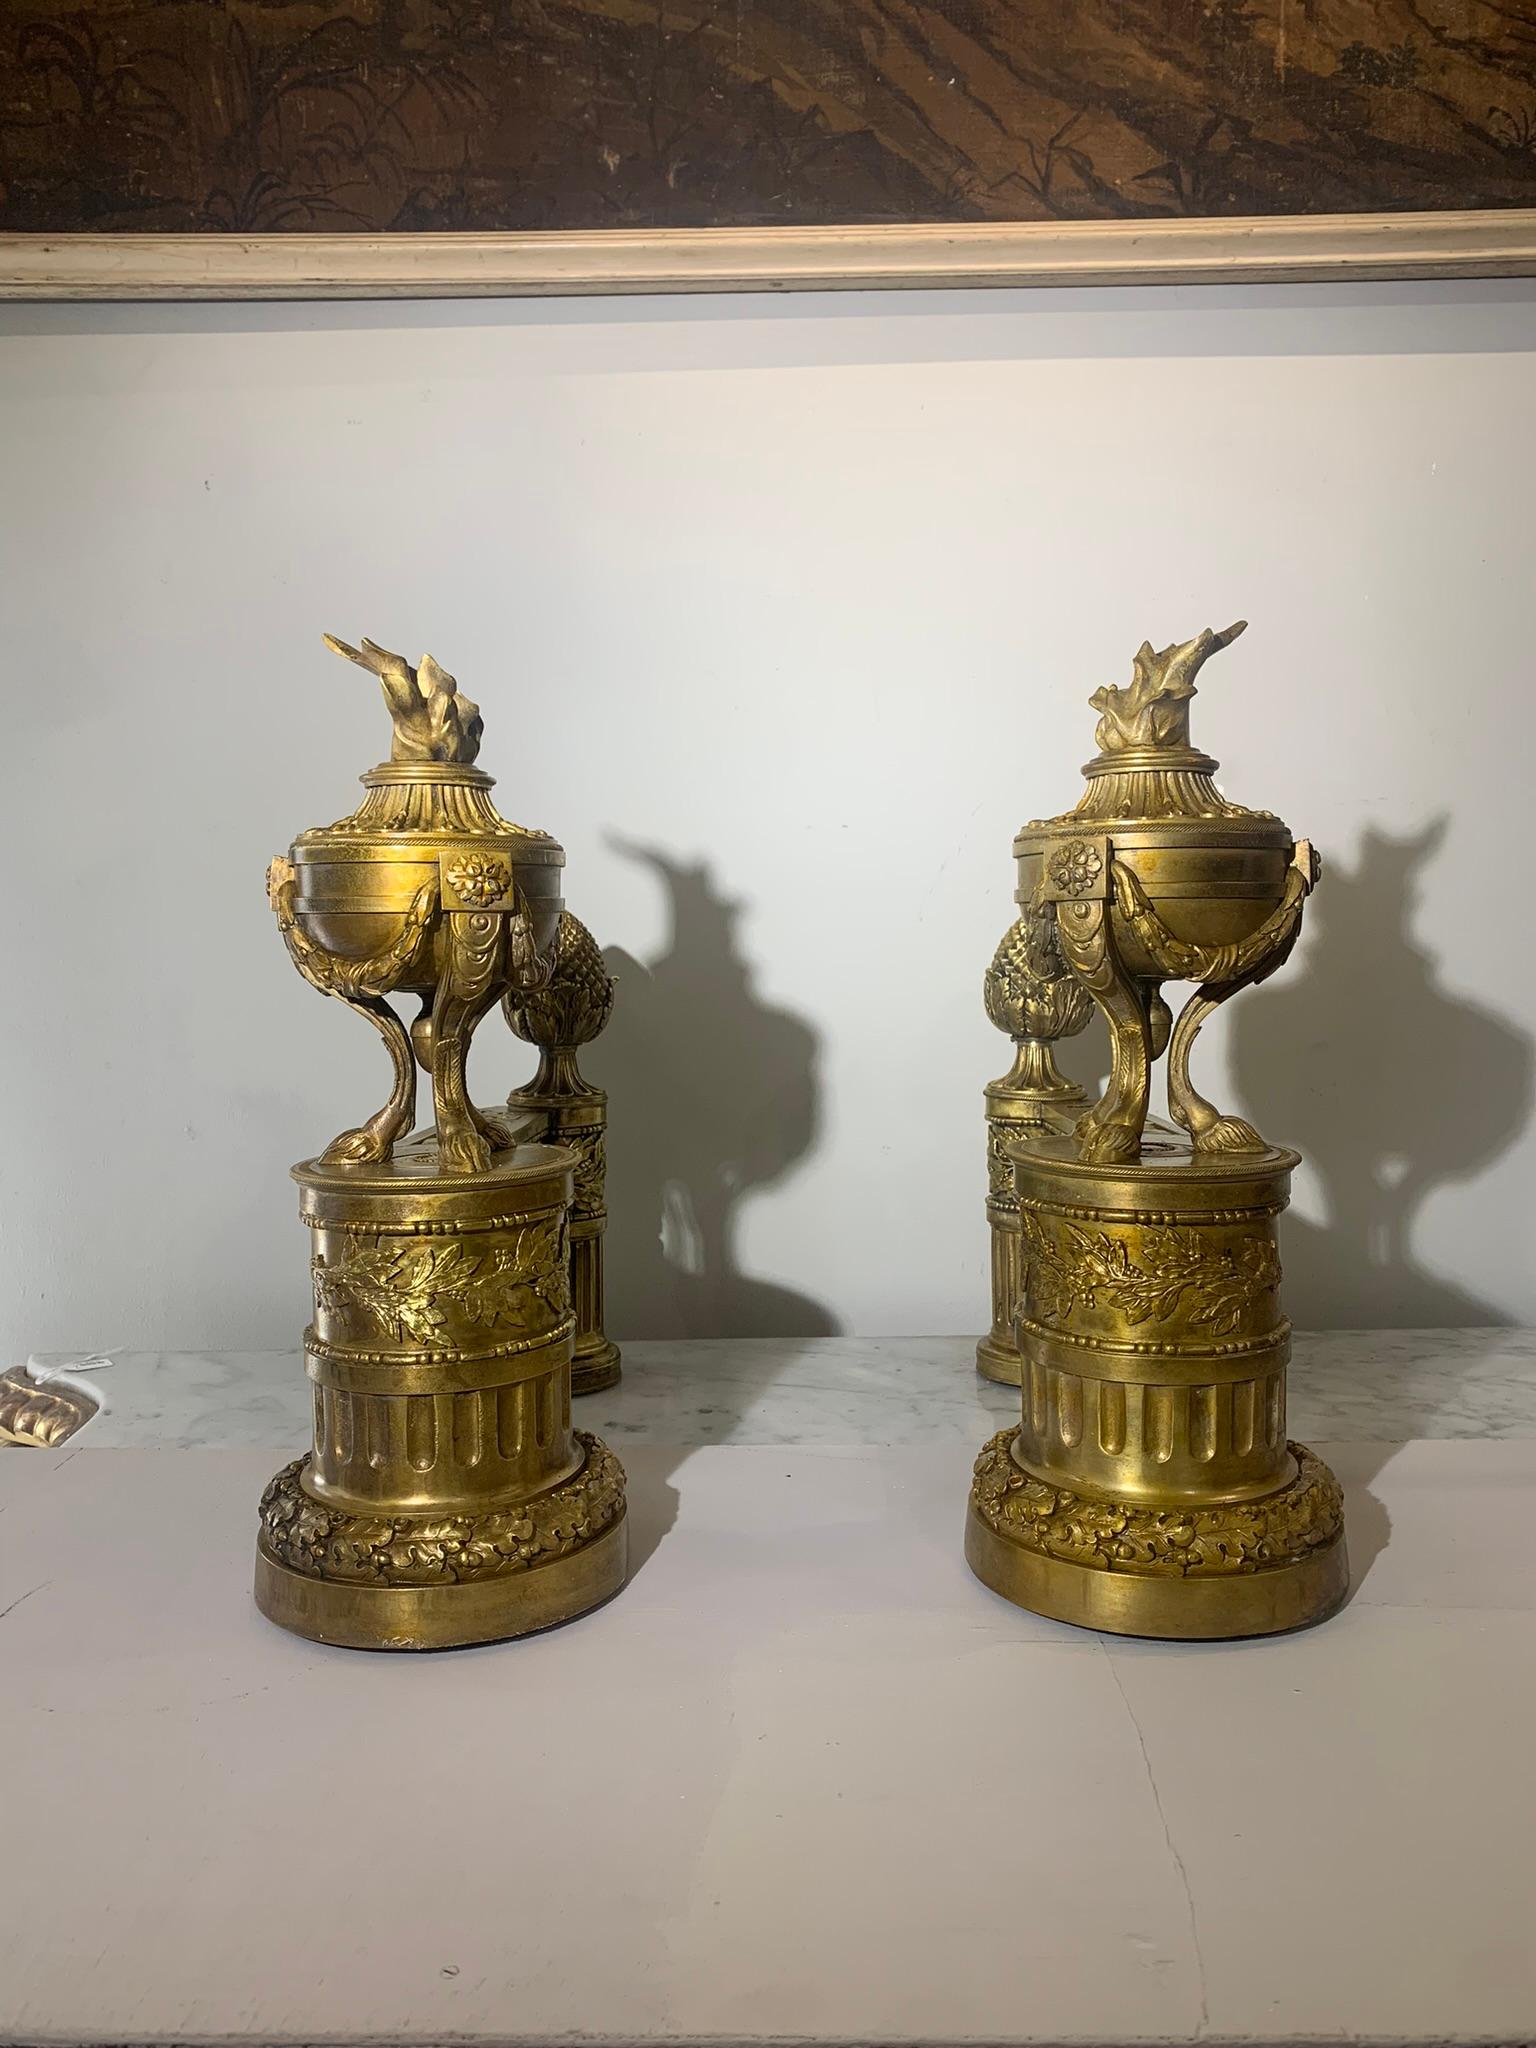 LATE 18th CENTURY PAIR OF NEOCLASSICAL GILDED BRONZE ANDIRONS For Sale 10